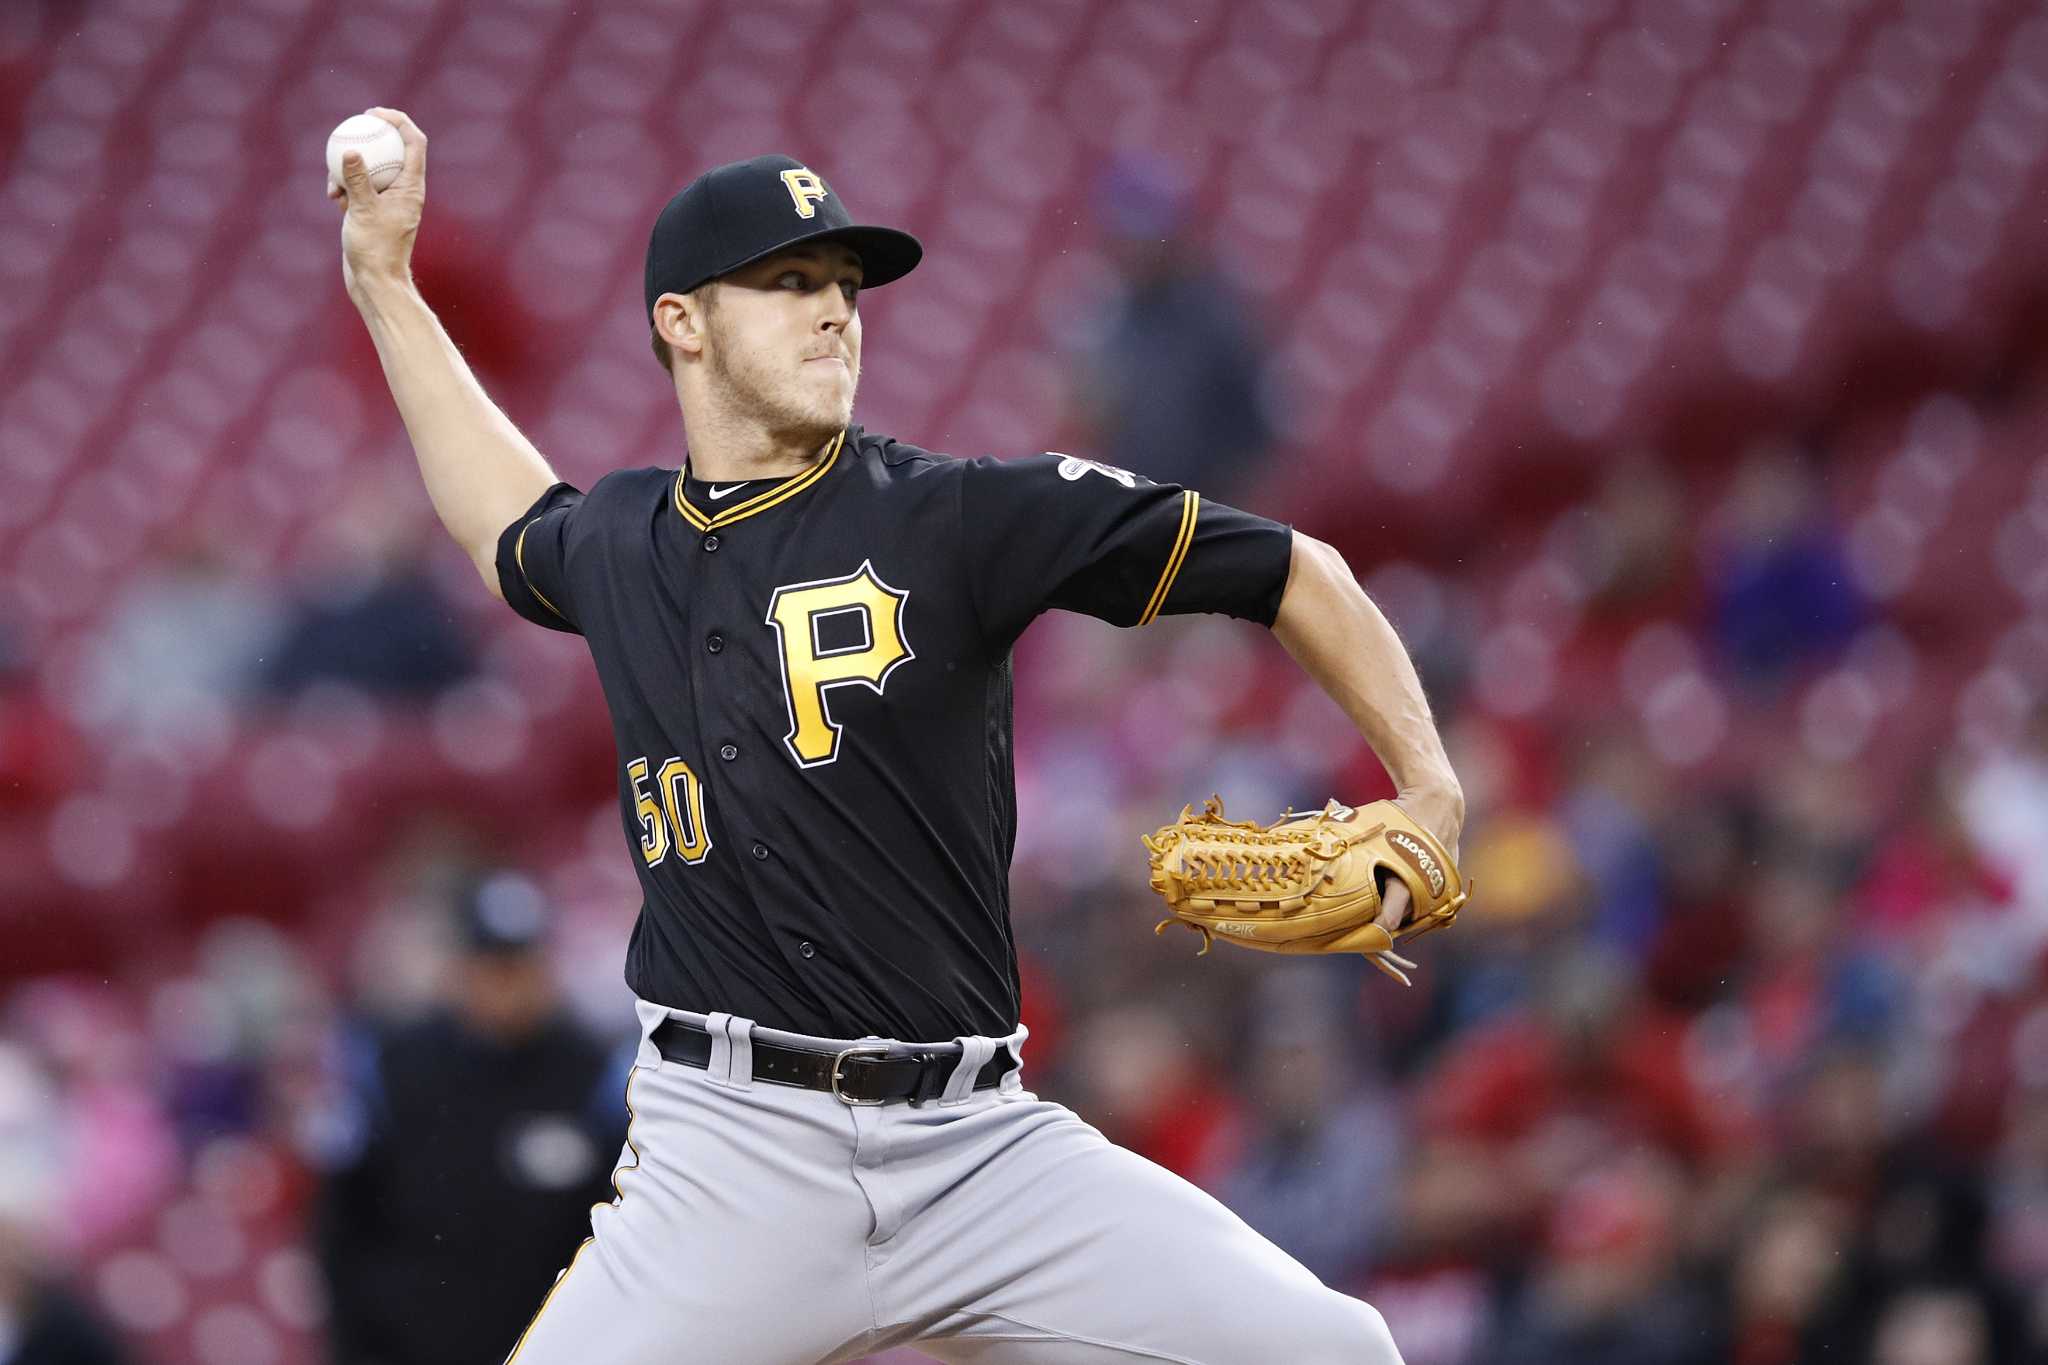 MLB: The Woodlands grad, Pirates pitcher Taillon has suspected